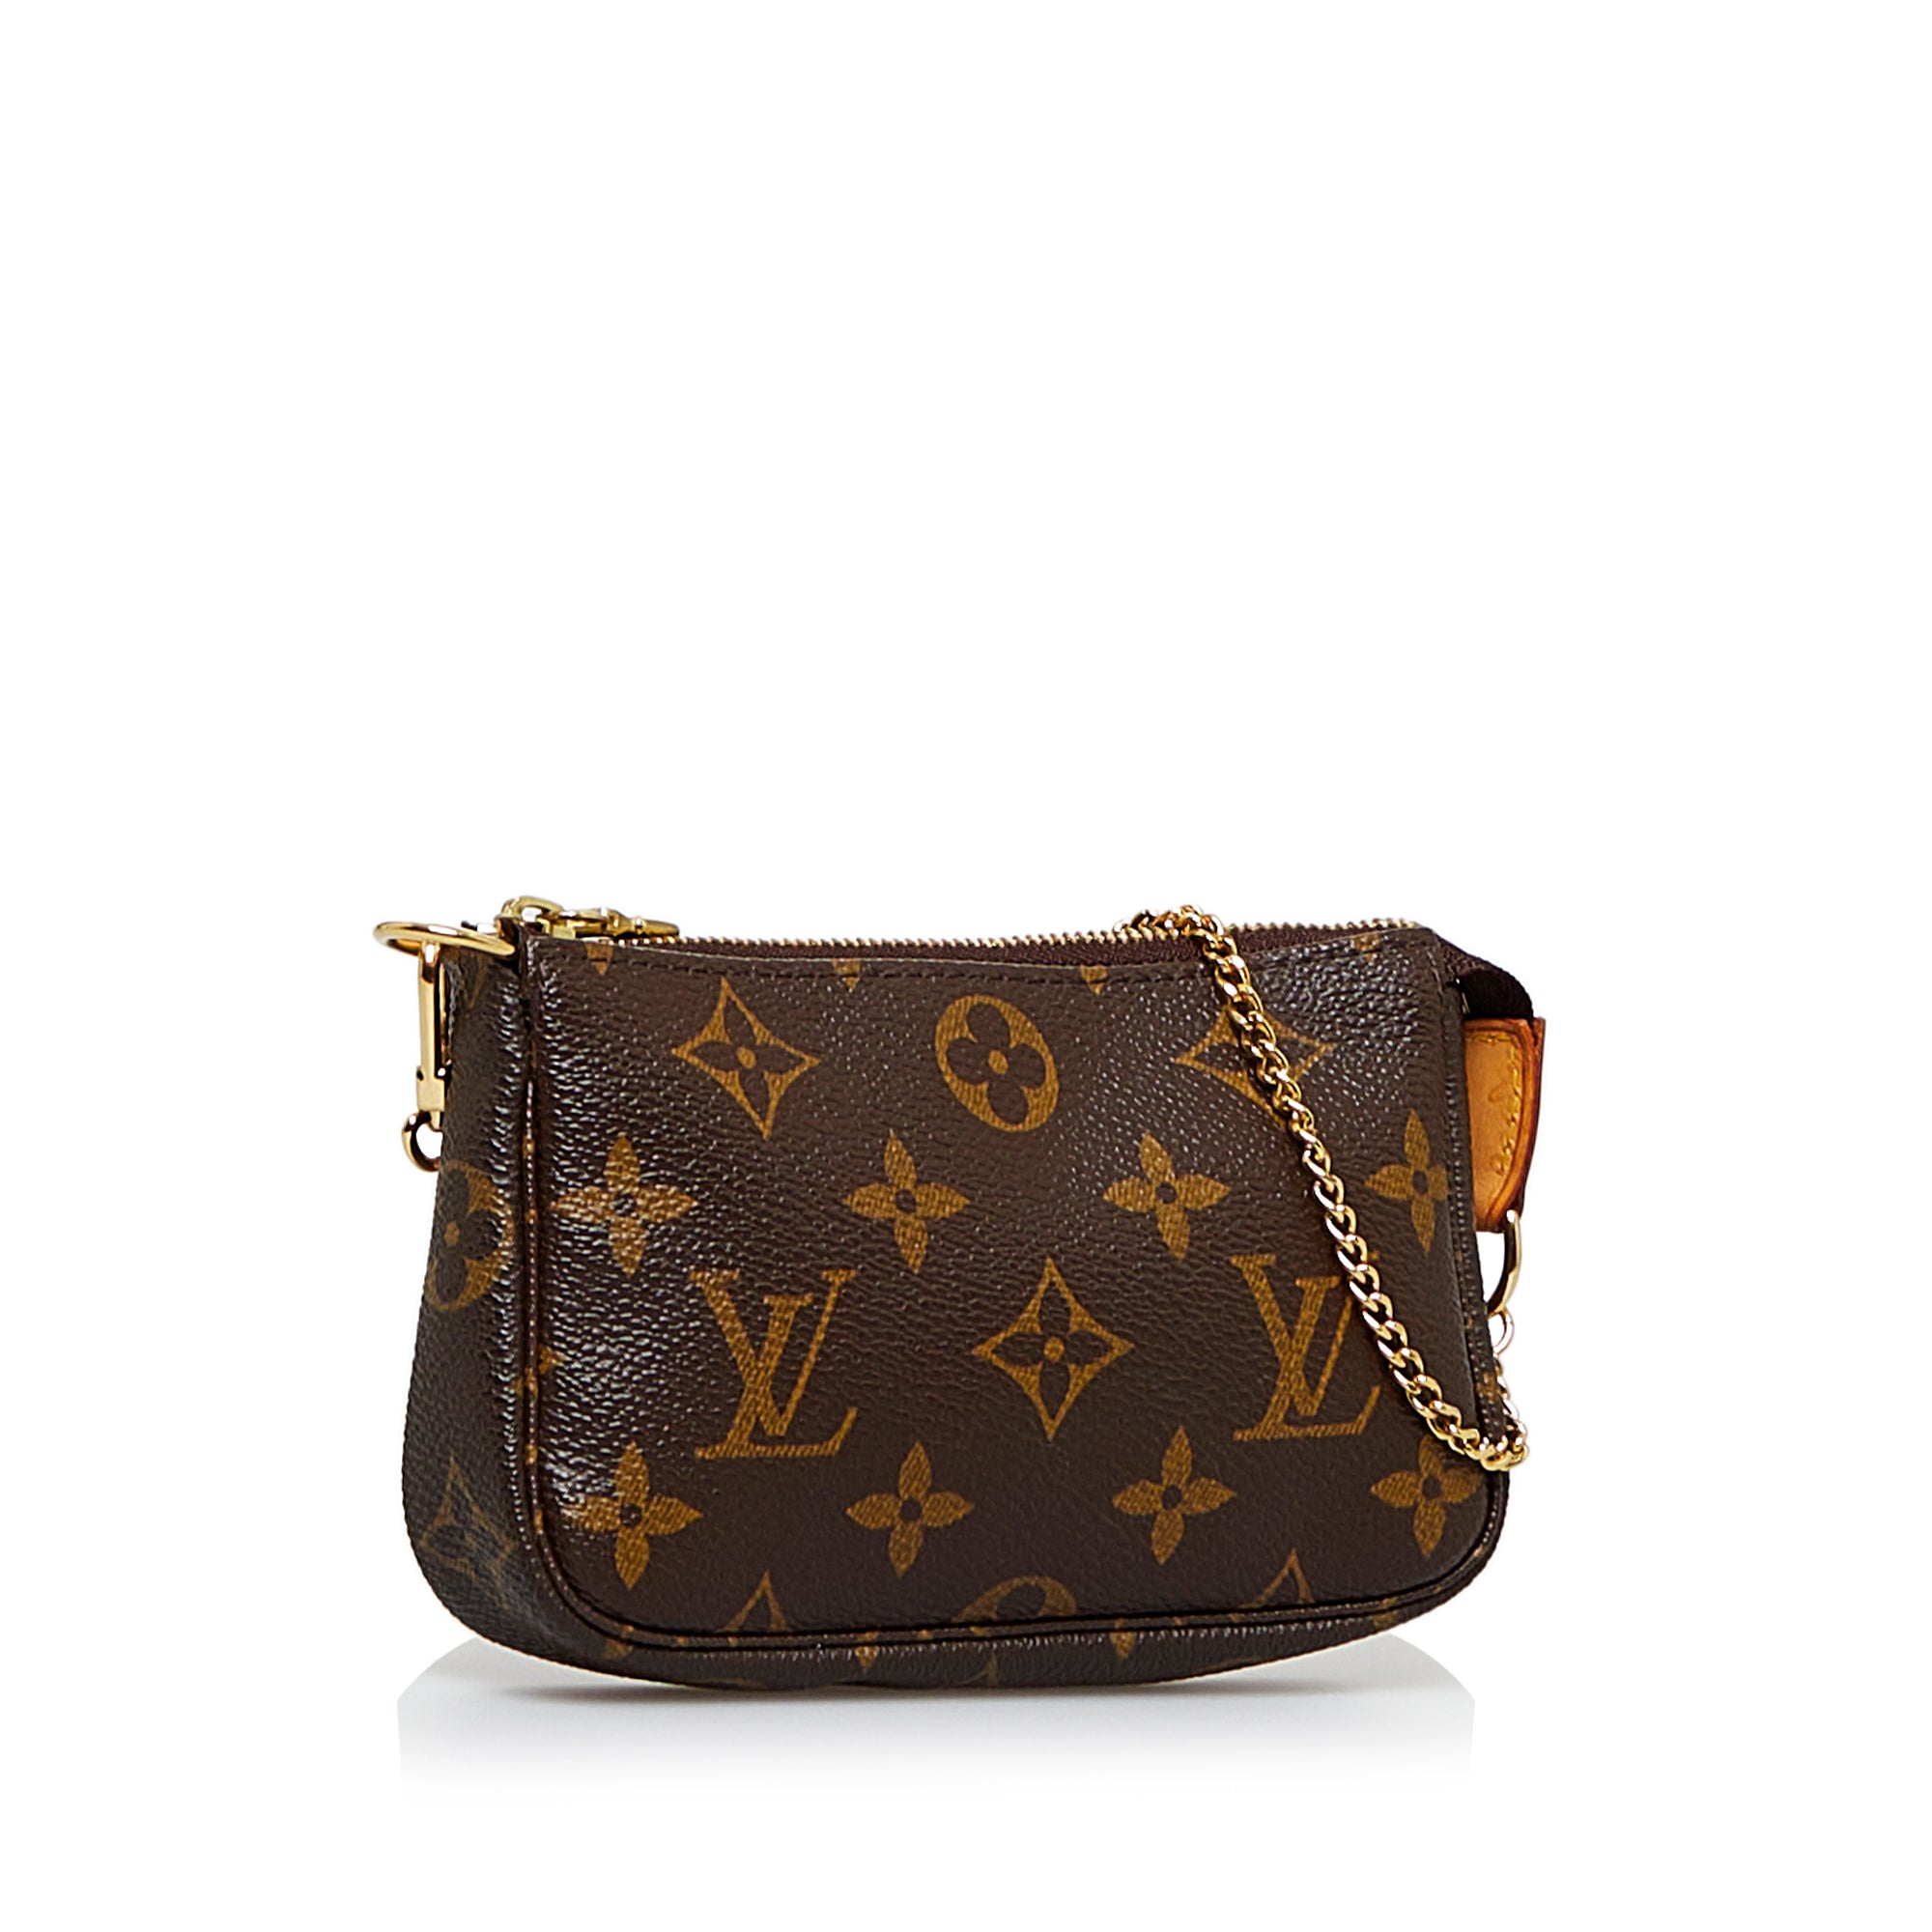 Louis Vuitton Pochette Accessoires, What's in my bag, What fits inside?